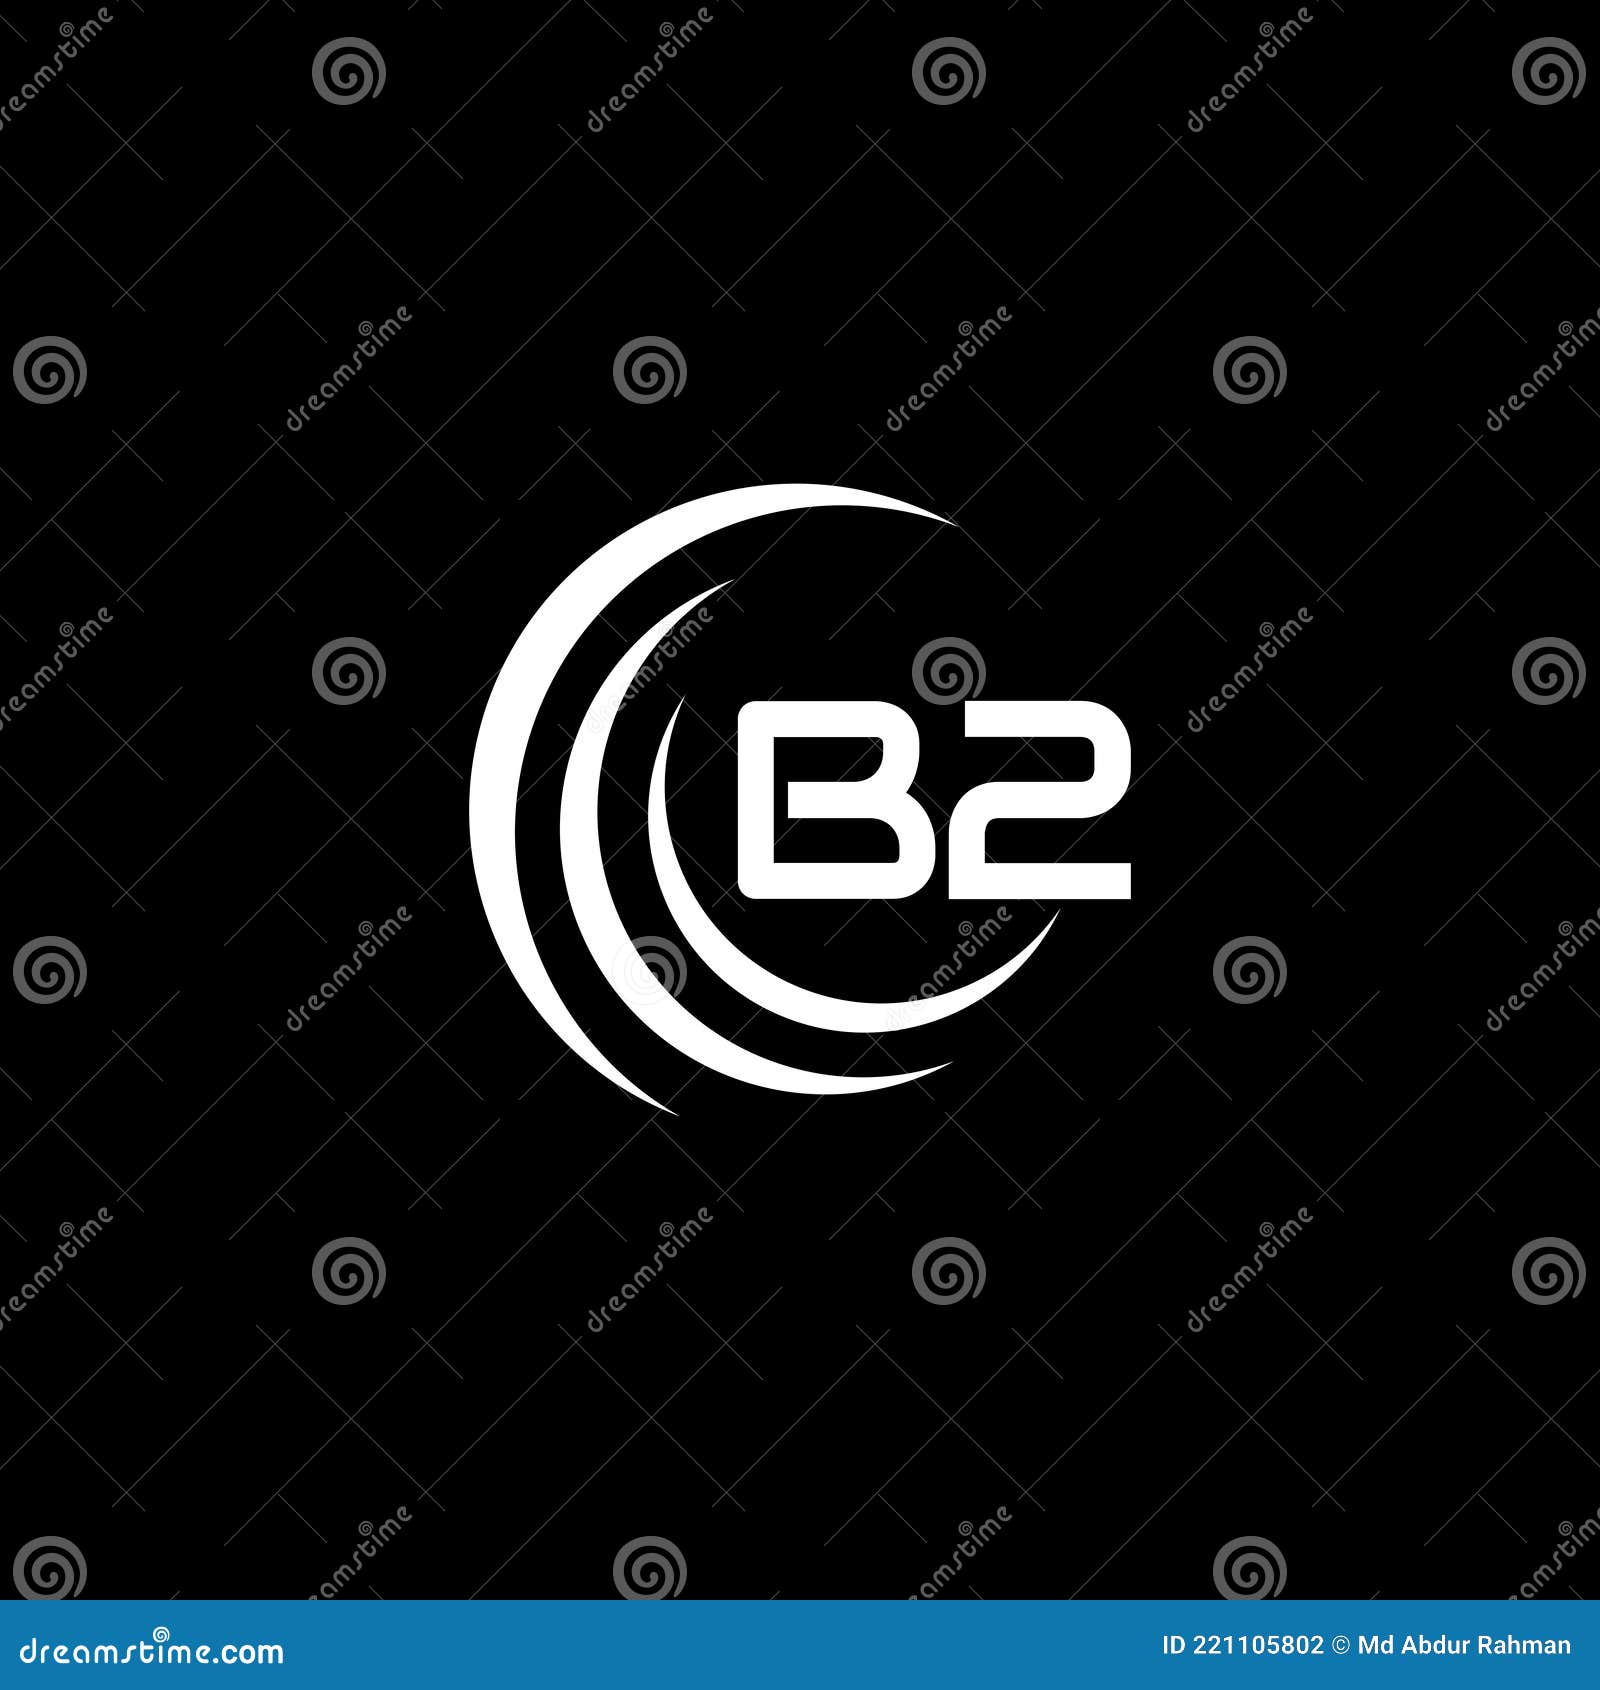 B2 Logo Vector Art, Icons, and Graphics for Free Download